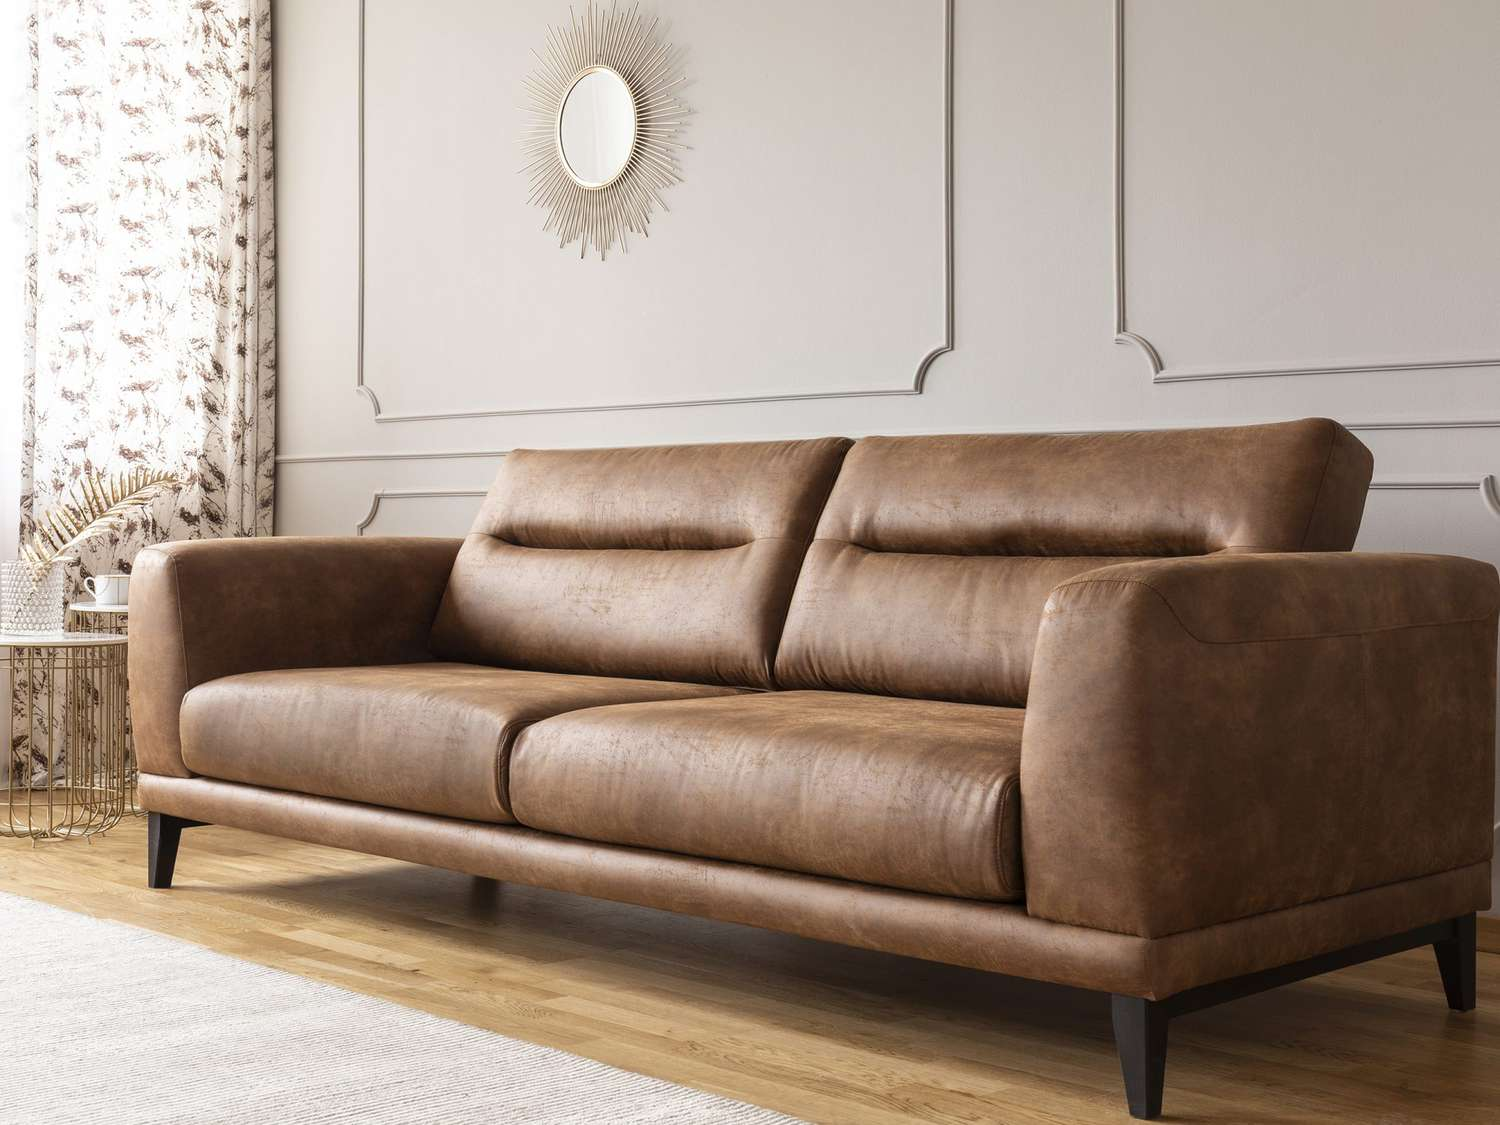 How to Clean a Leather Couch: Keep Yours in Tip-Top Shape With These Cleaning Tips